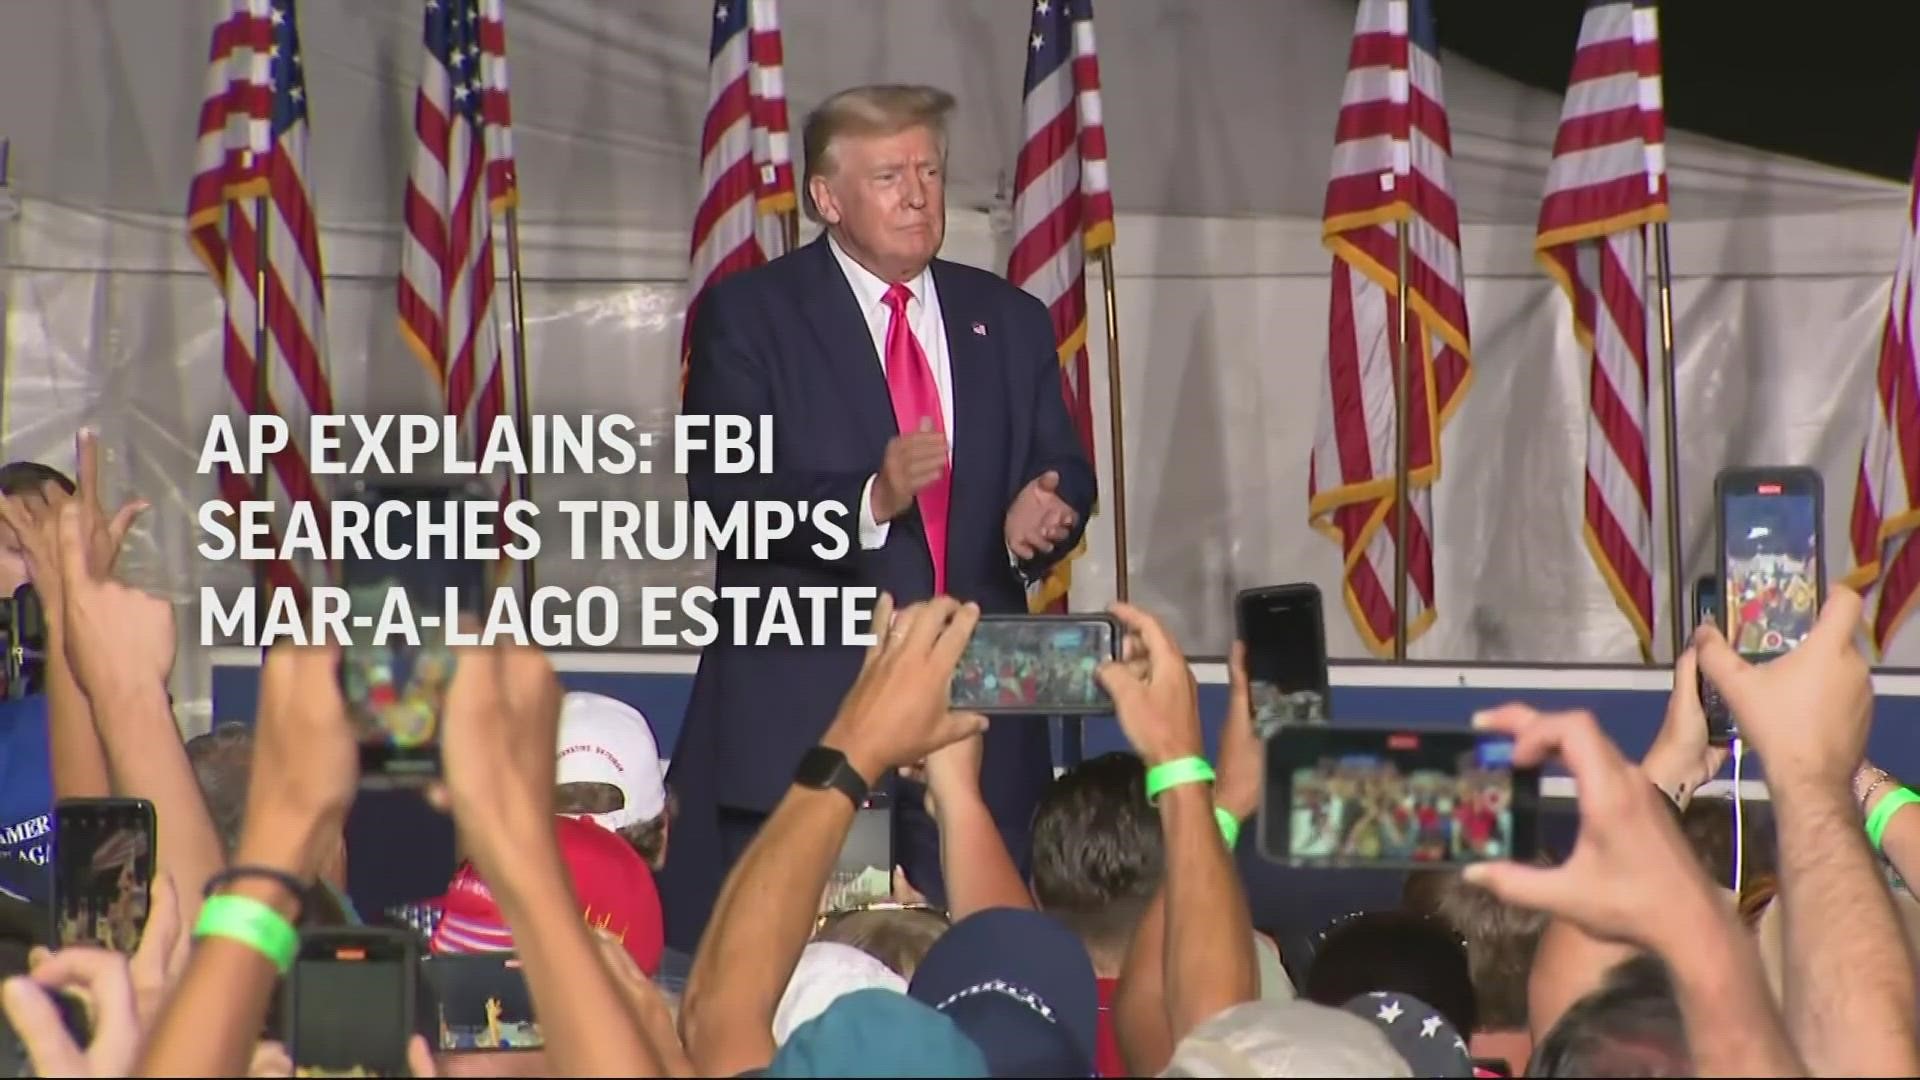 The FBI on Monday searched former President Trump’s Mar-a-Lago estate as part of an investigation into whether he took classified records from the White House.